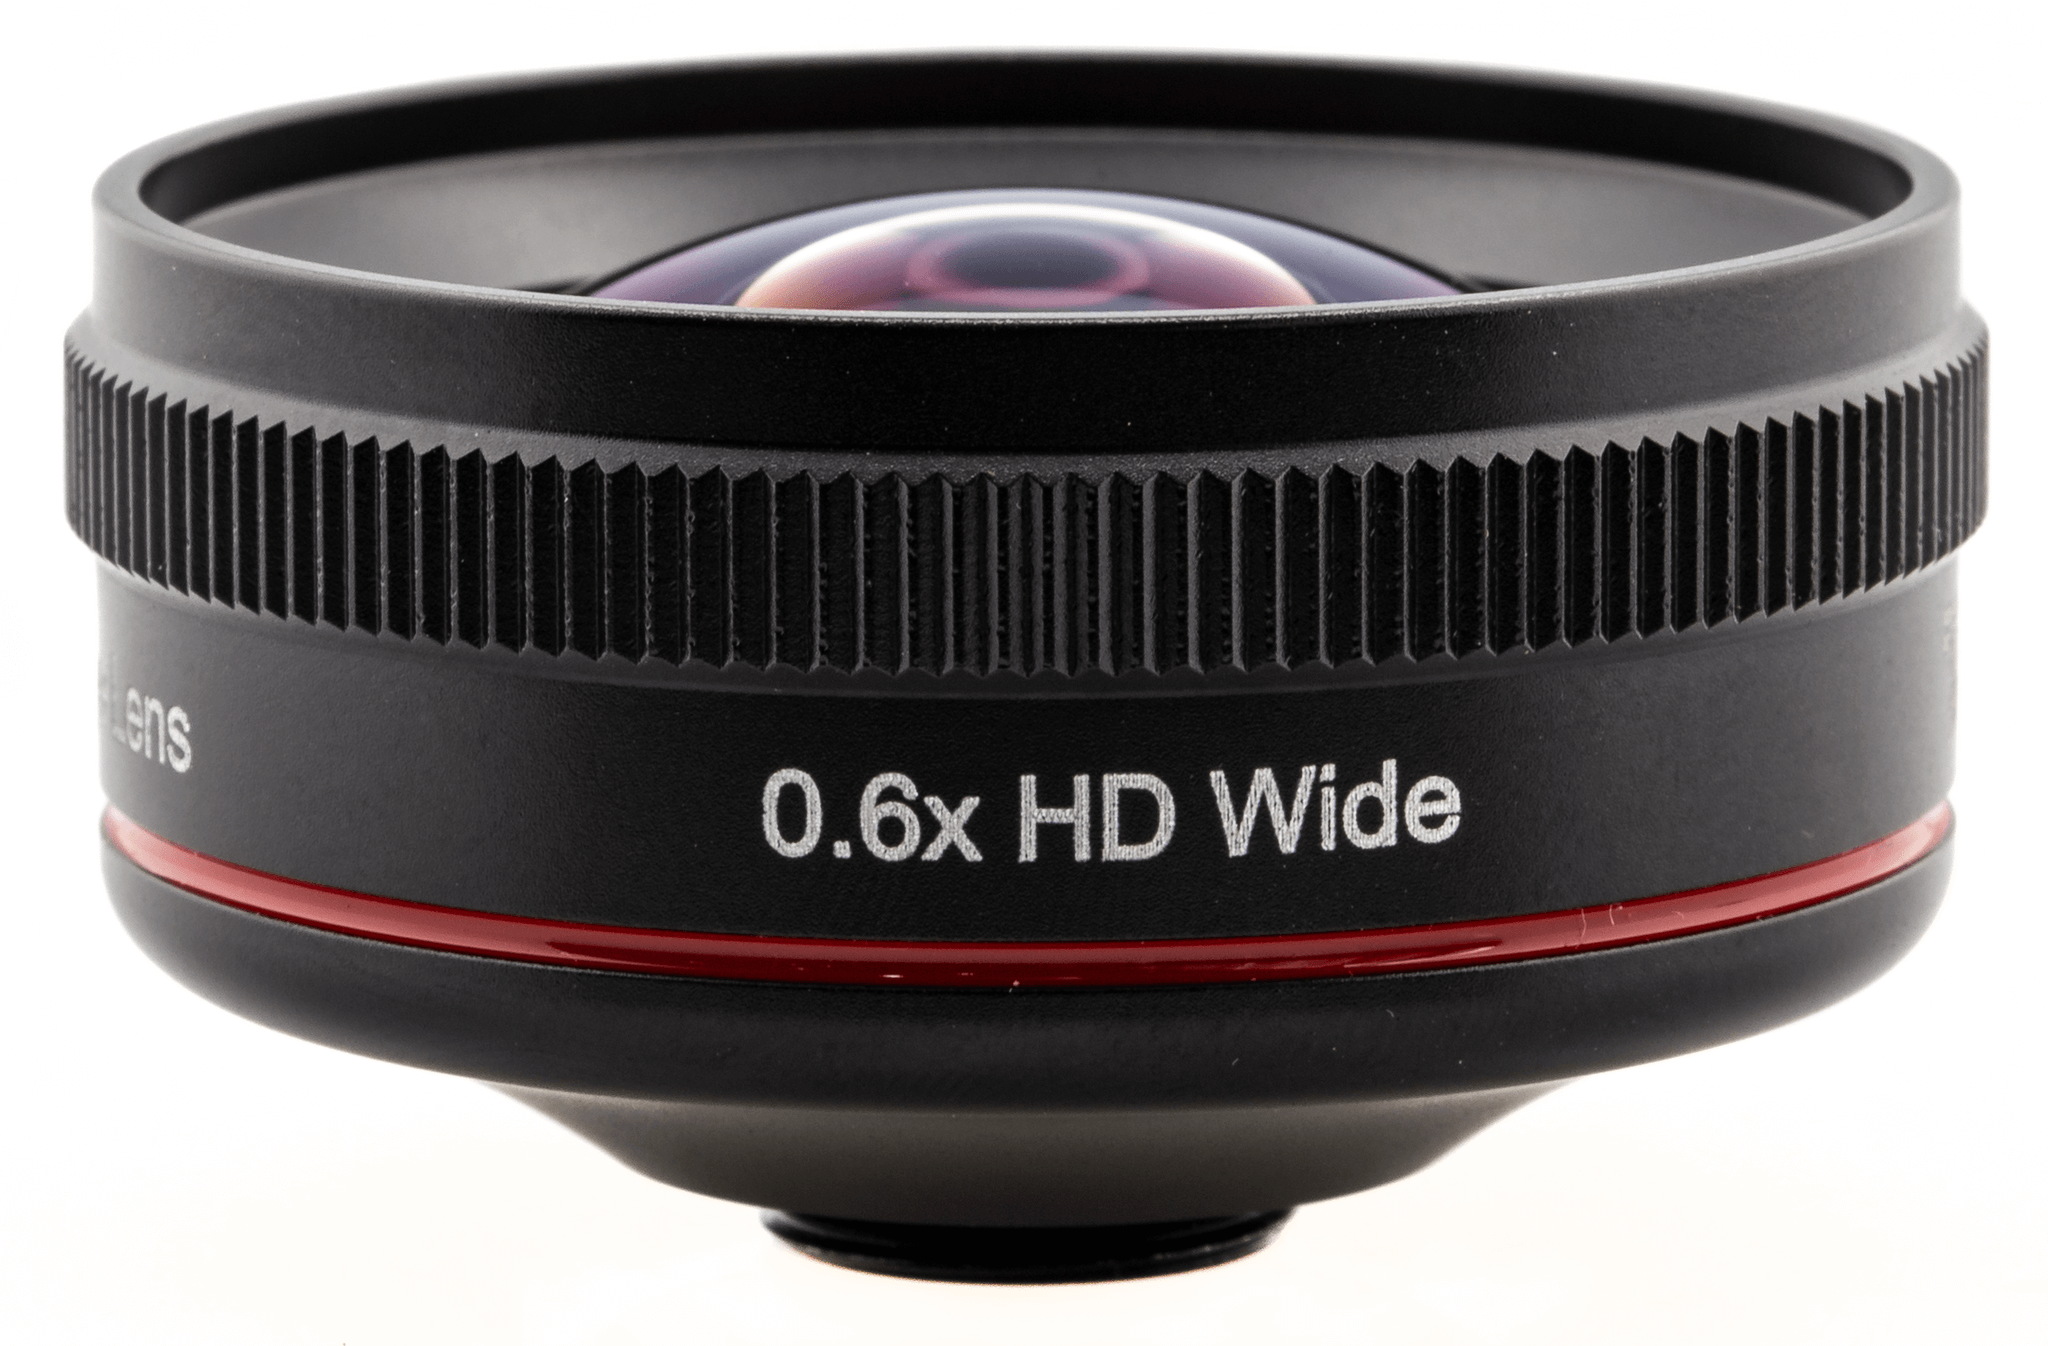 wide-angle telephoto lens for mobile phones